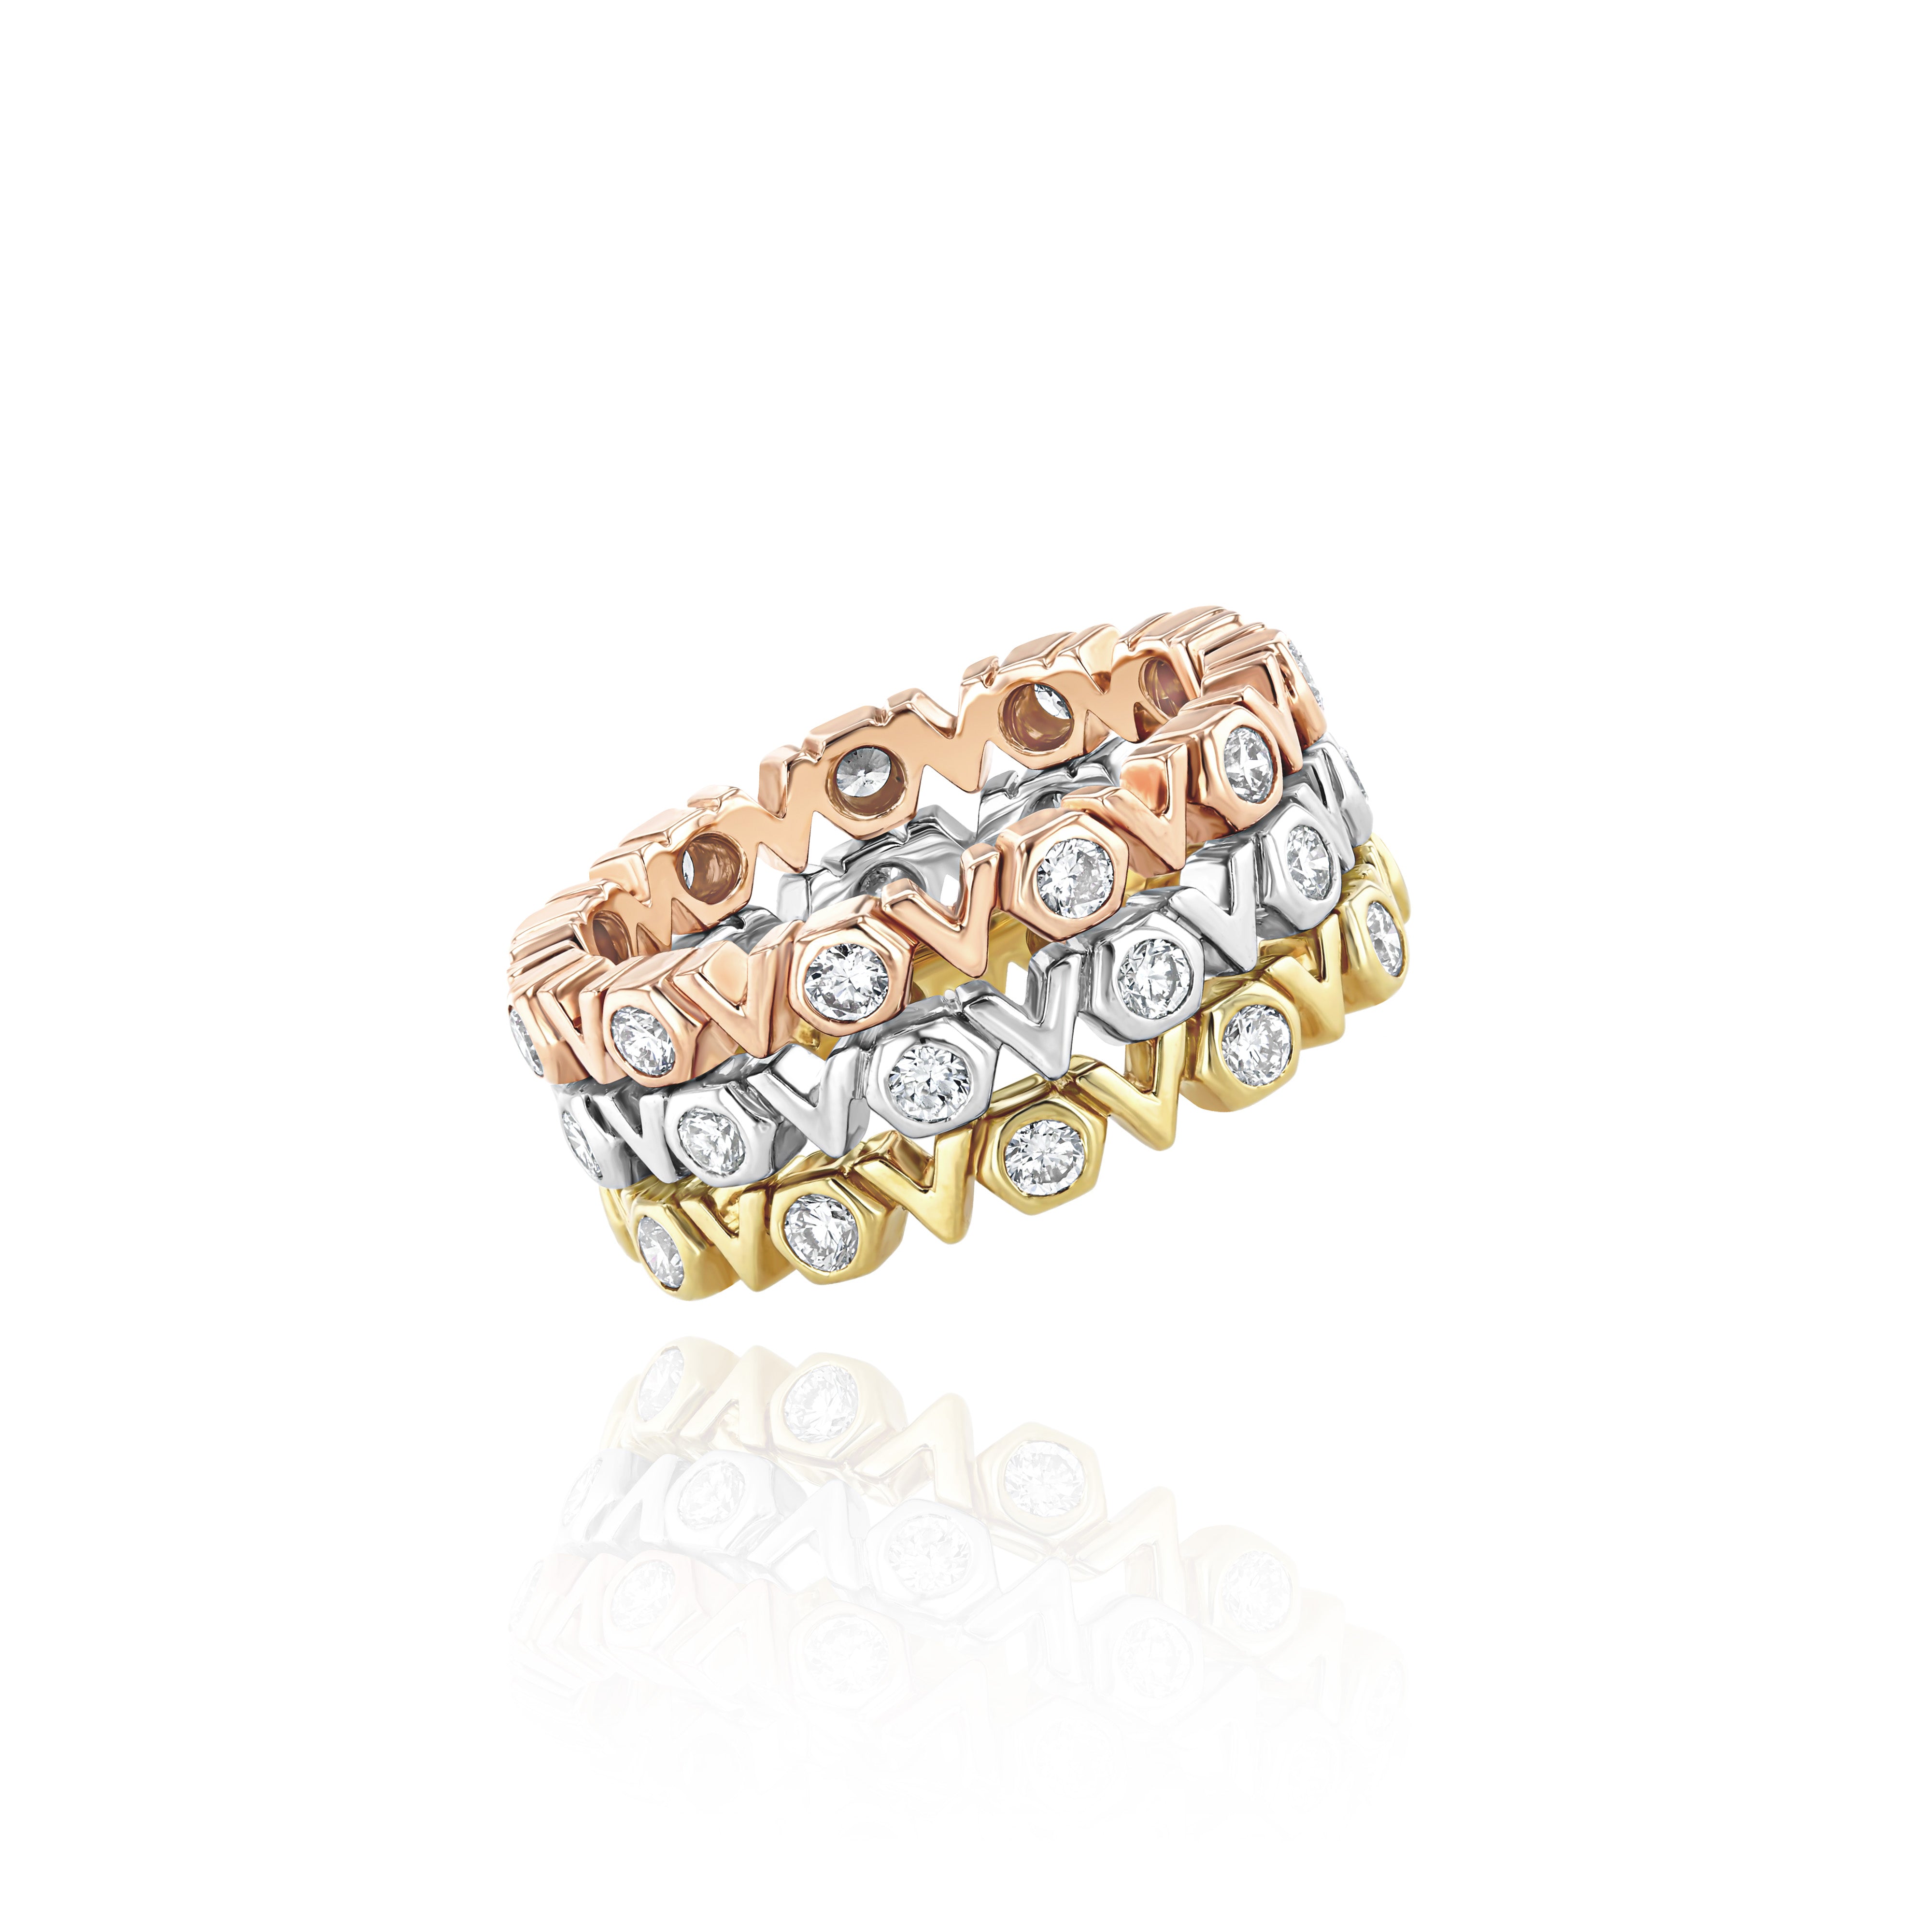 Three Rings - Rose Gold and Diamond, White Gold and Diamond, Yellow Gold and Diamond, Medium